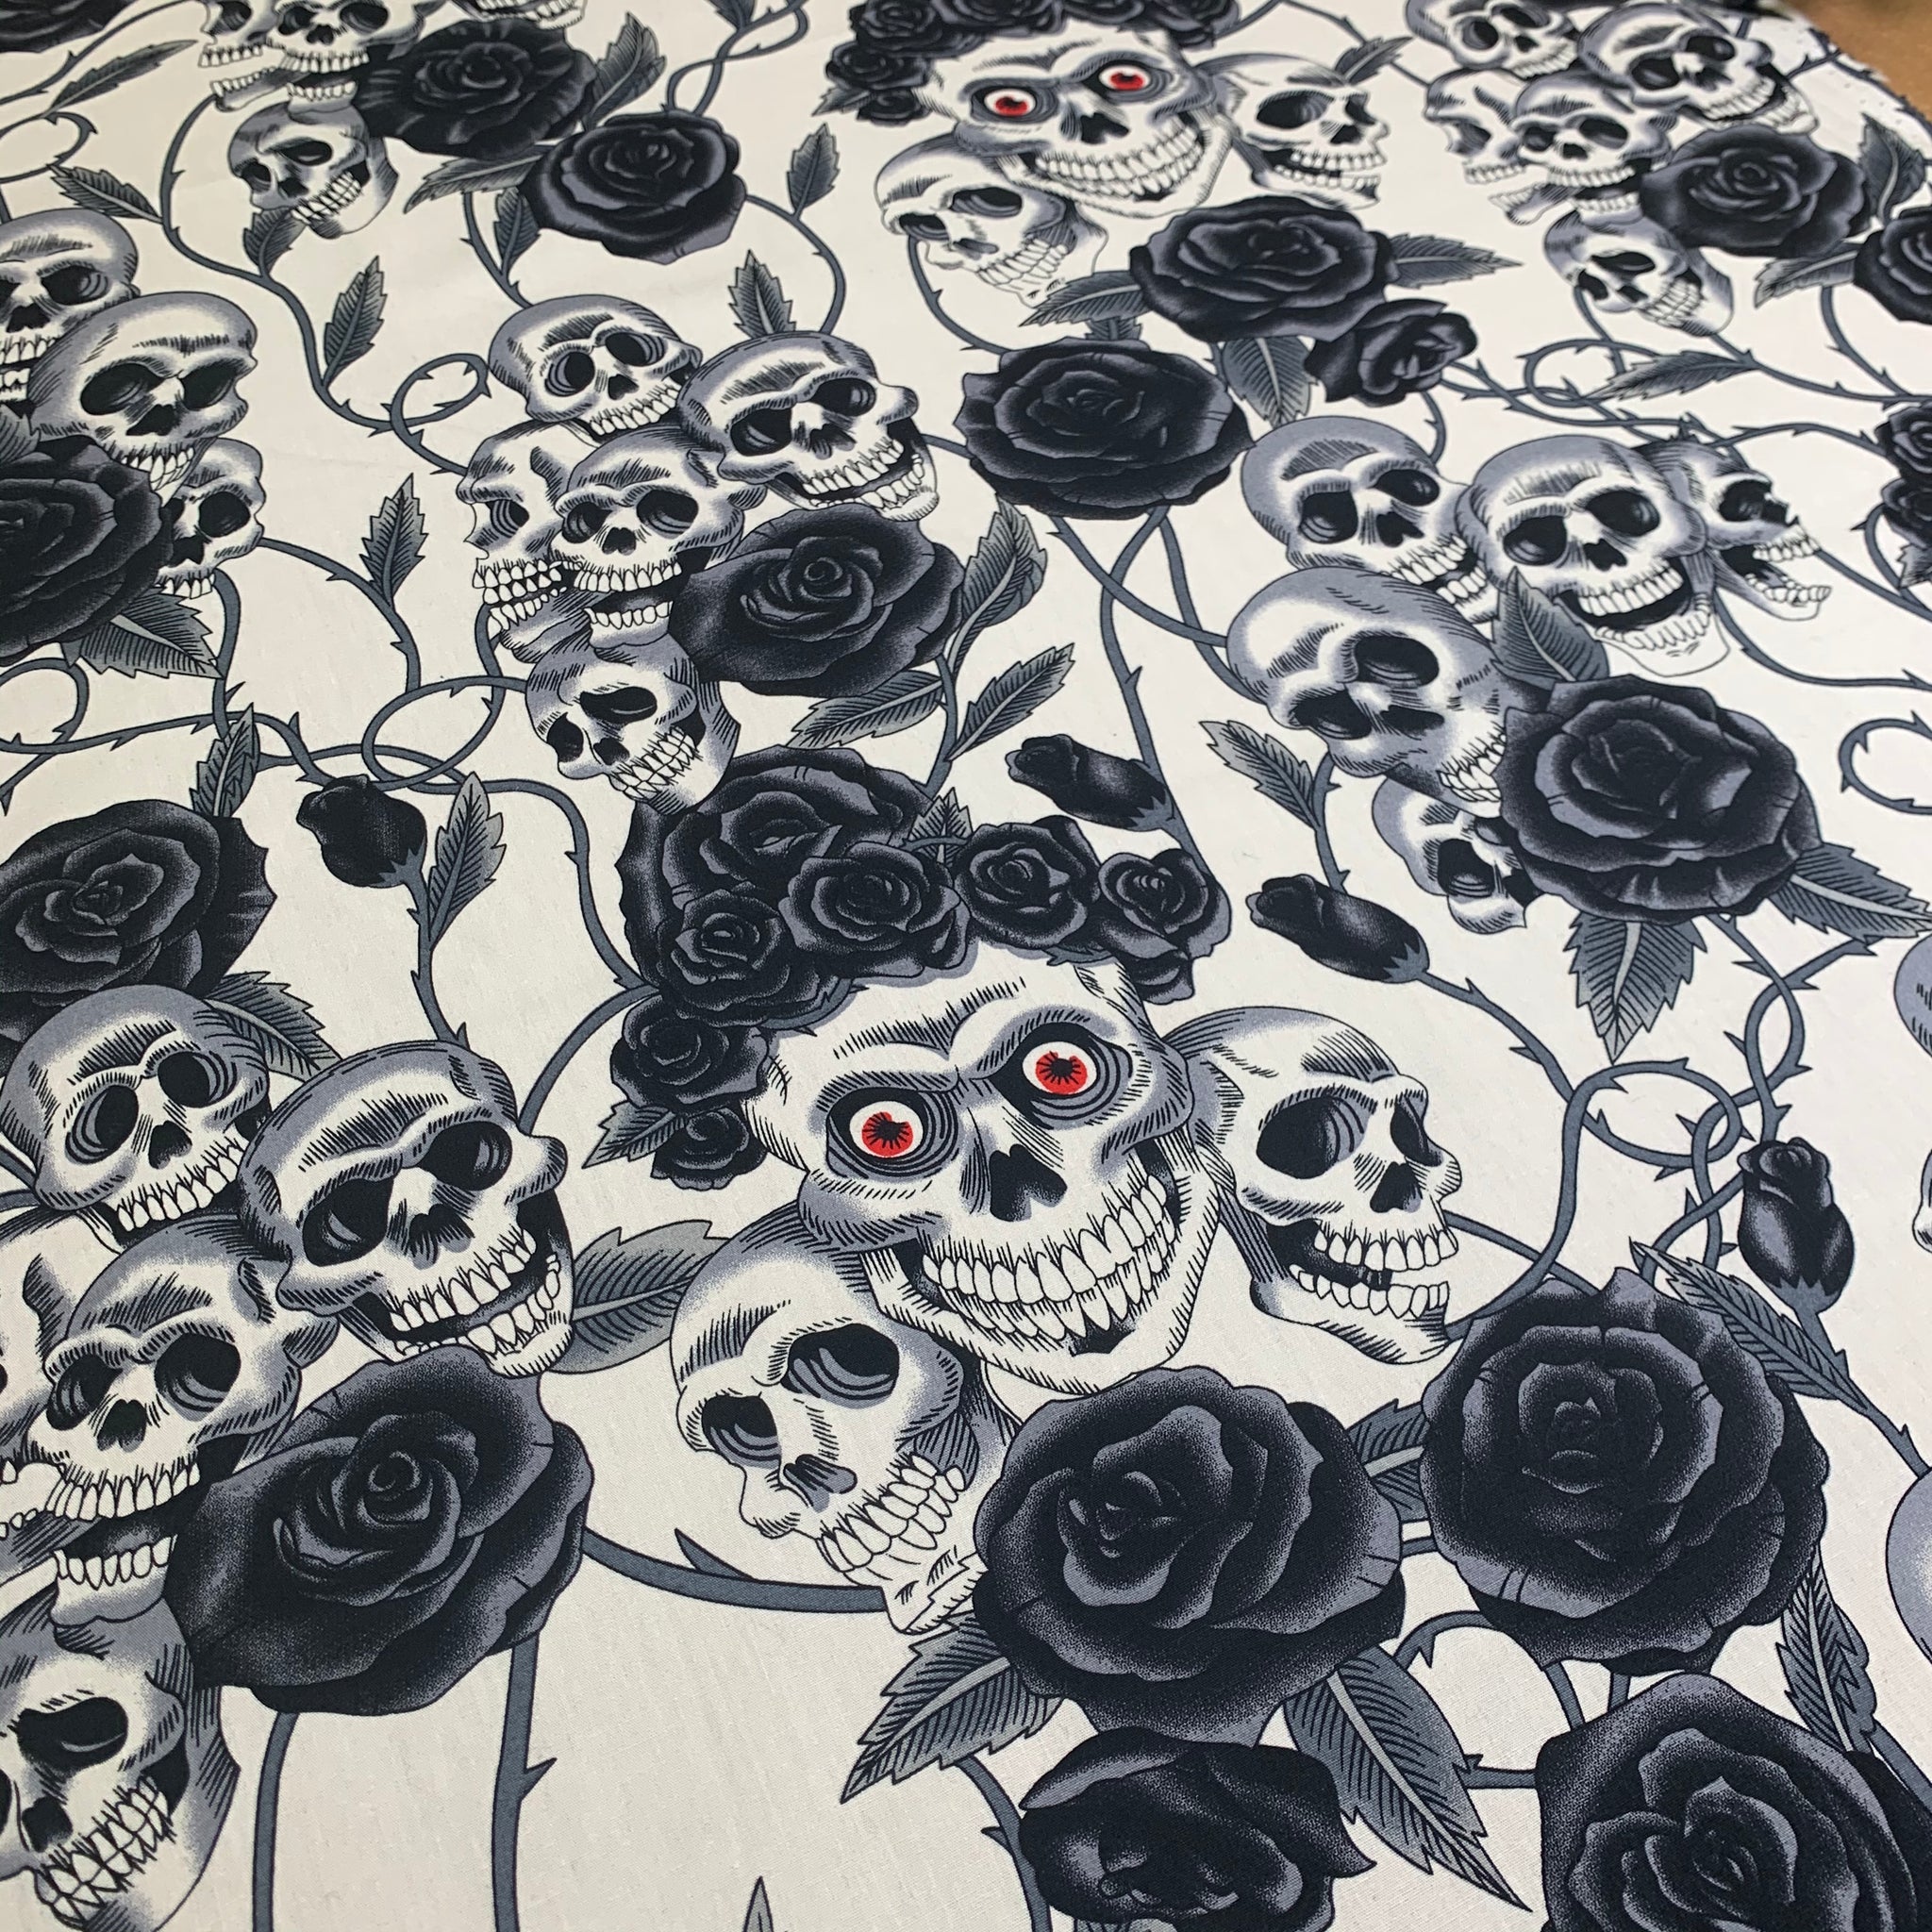 Halloween Skull and roses printed 100% cotton poplin craft mask Fabric MD1399 Mtex